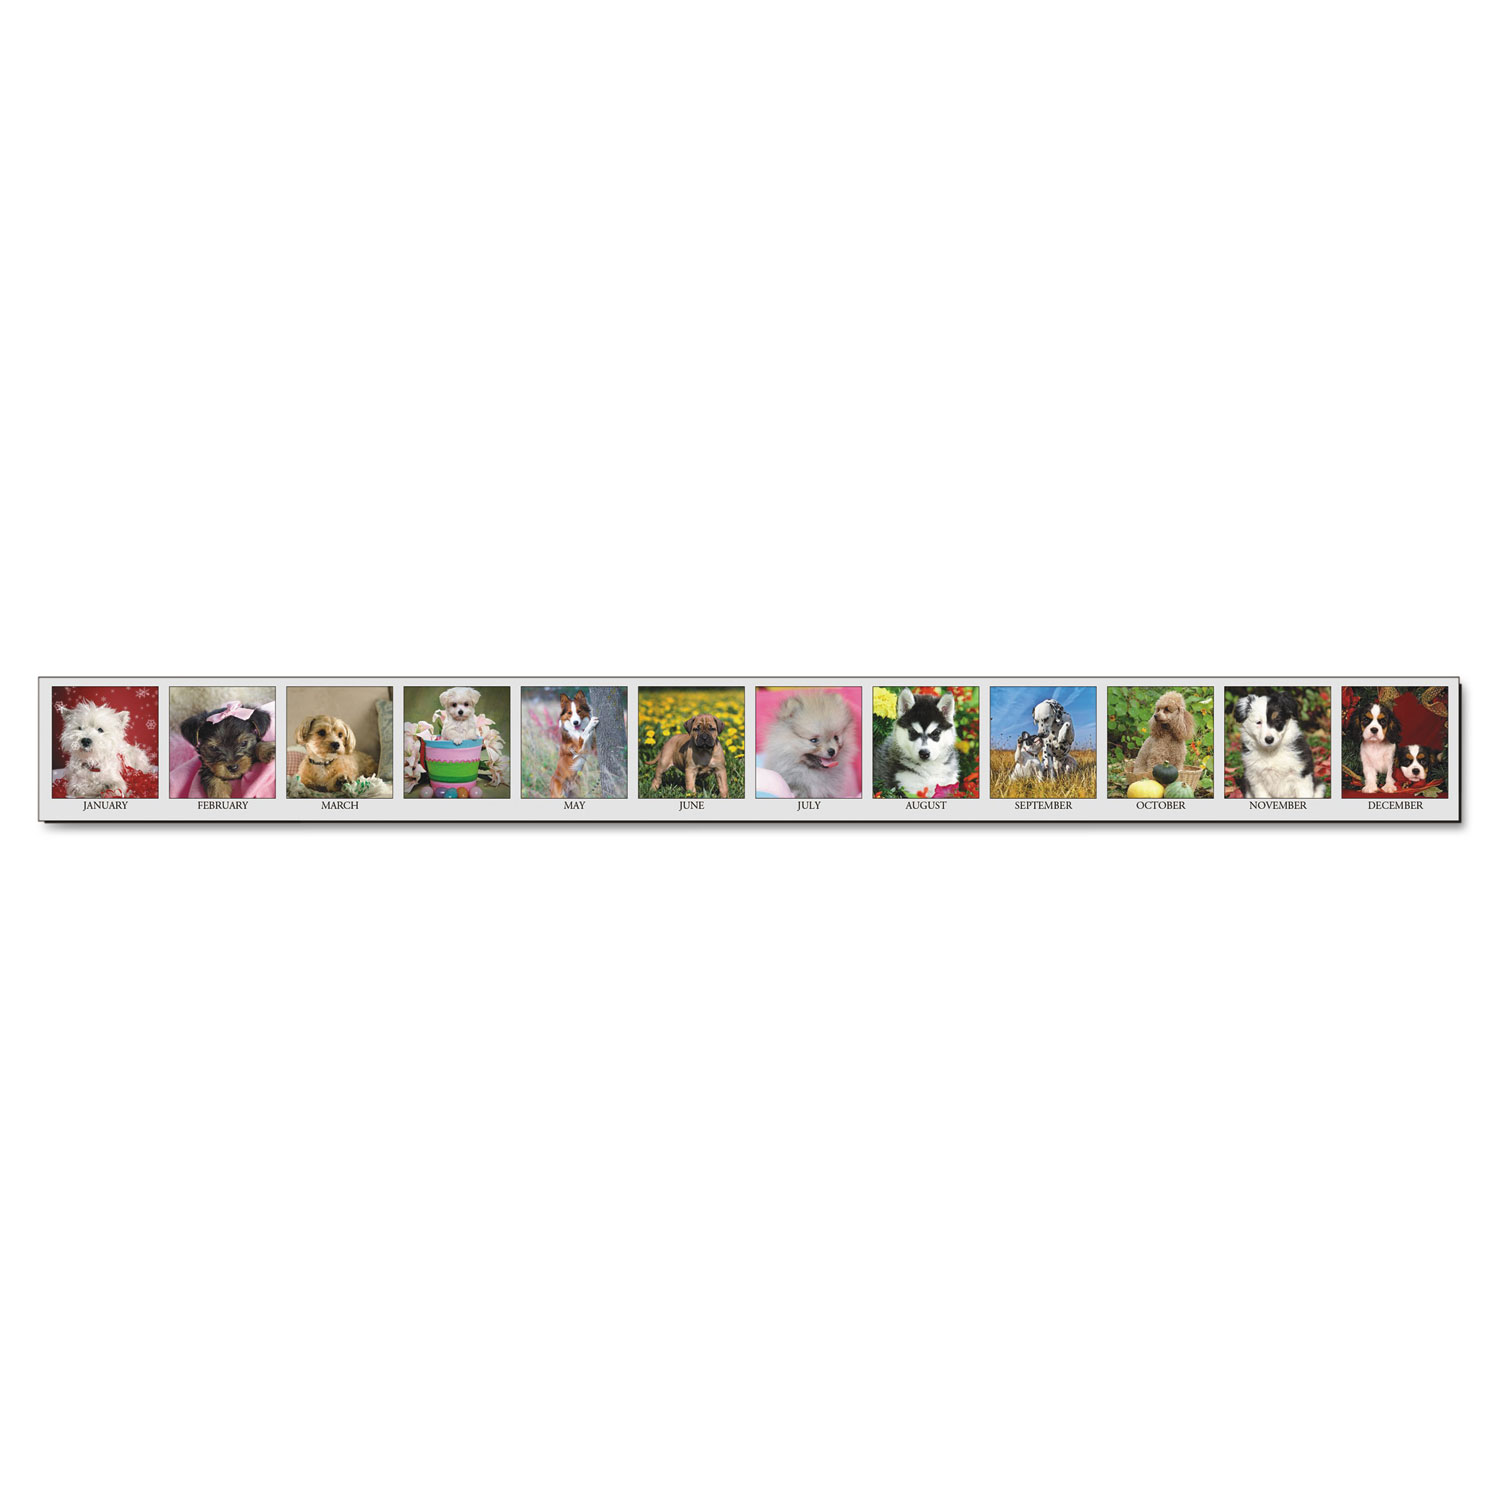 Recycled Puppies Photographic Monthly Desk Pad Calendar, 22 x 17, 2018